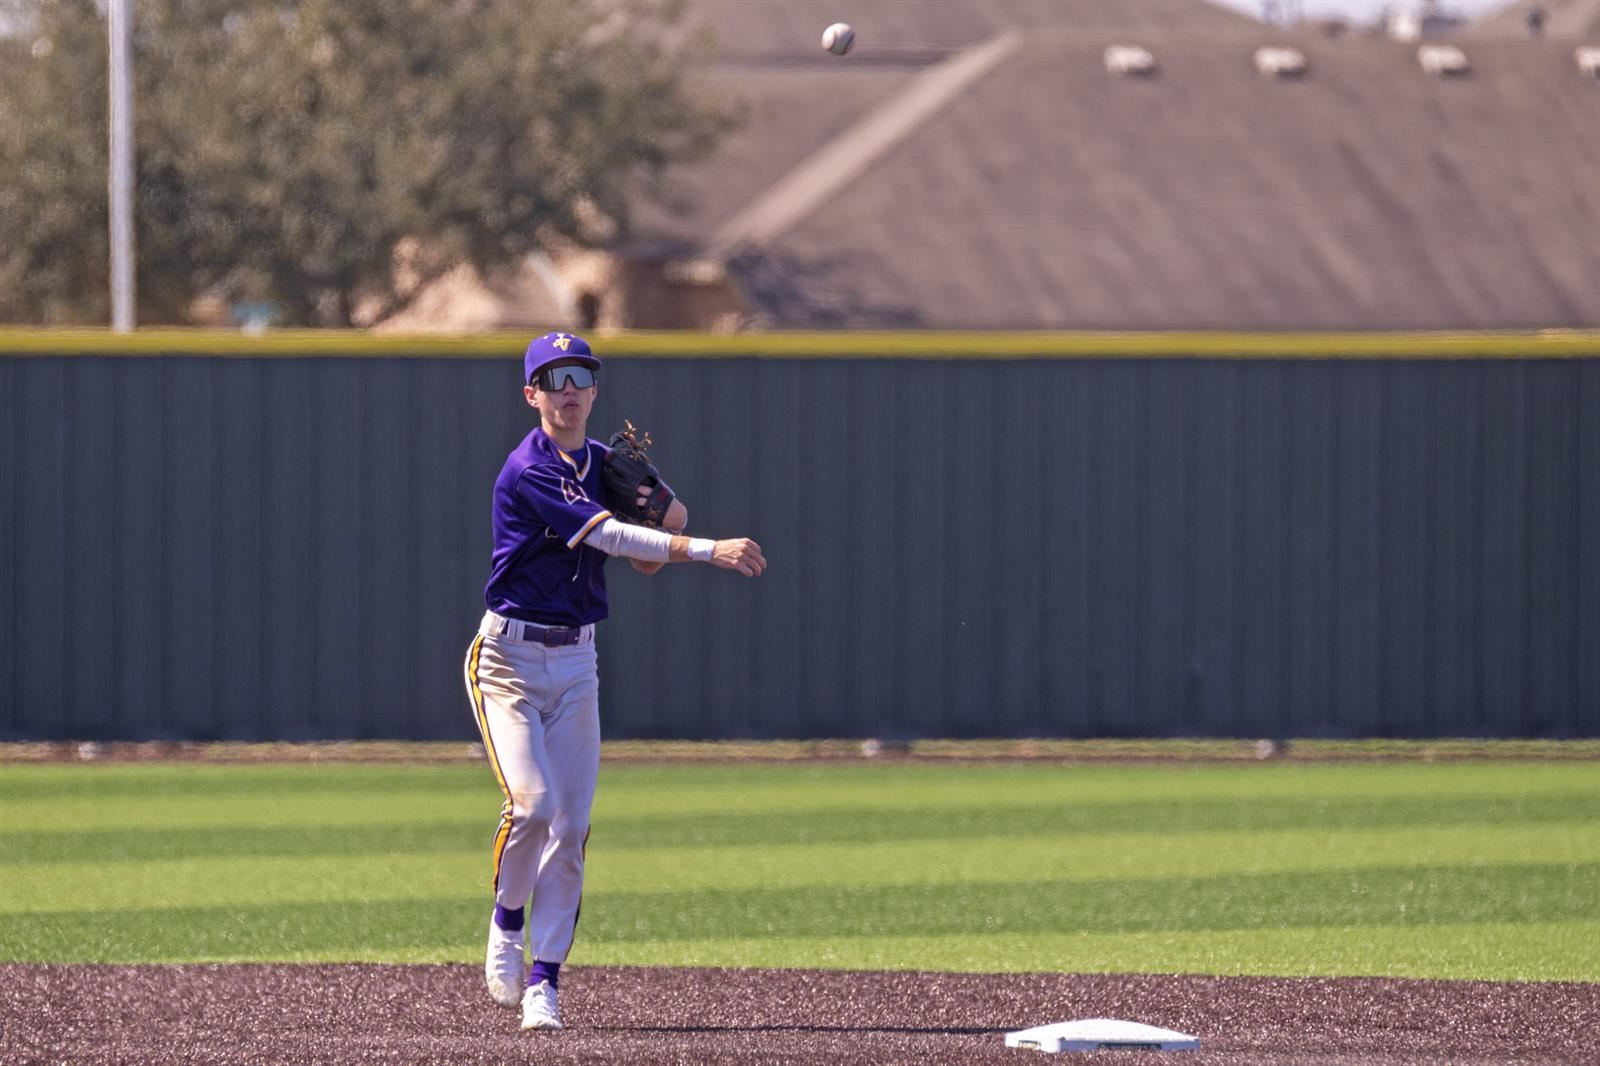 Jersey Village High School senior Toby Deluca was named to the Academic All-District 17-6A Baseball Team.